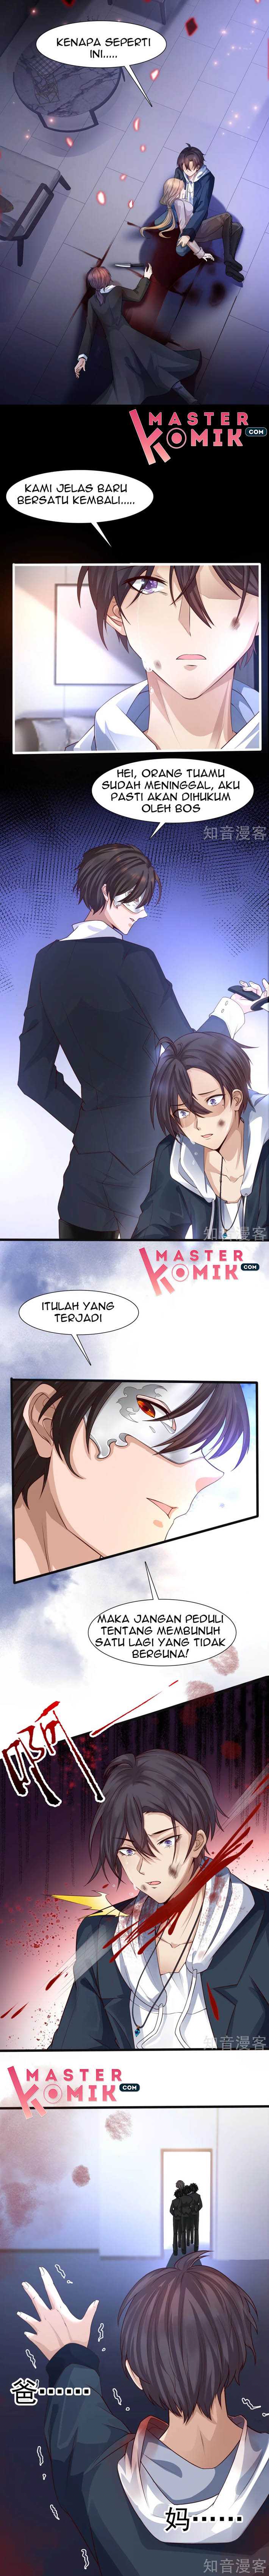 The Goddes Took Me To Be a Master Chapter 1 9